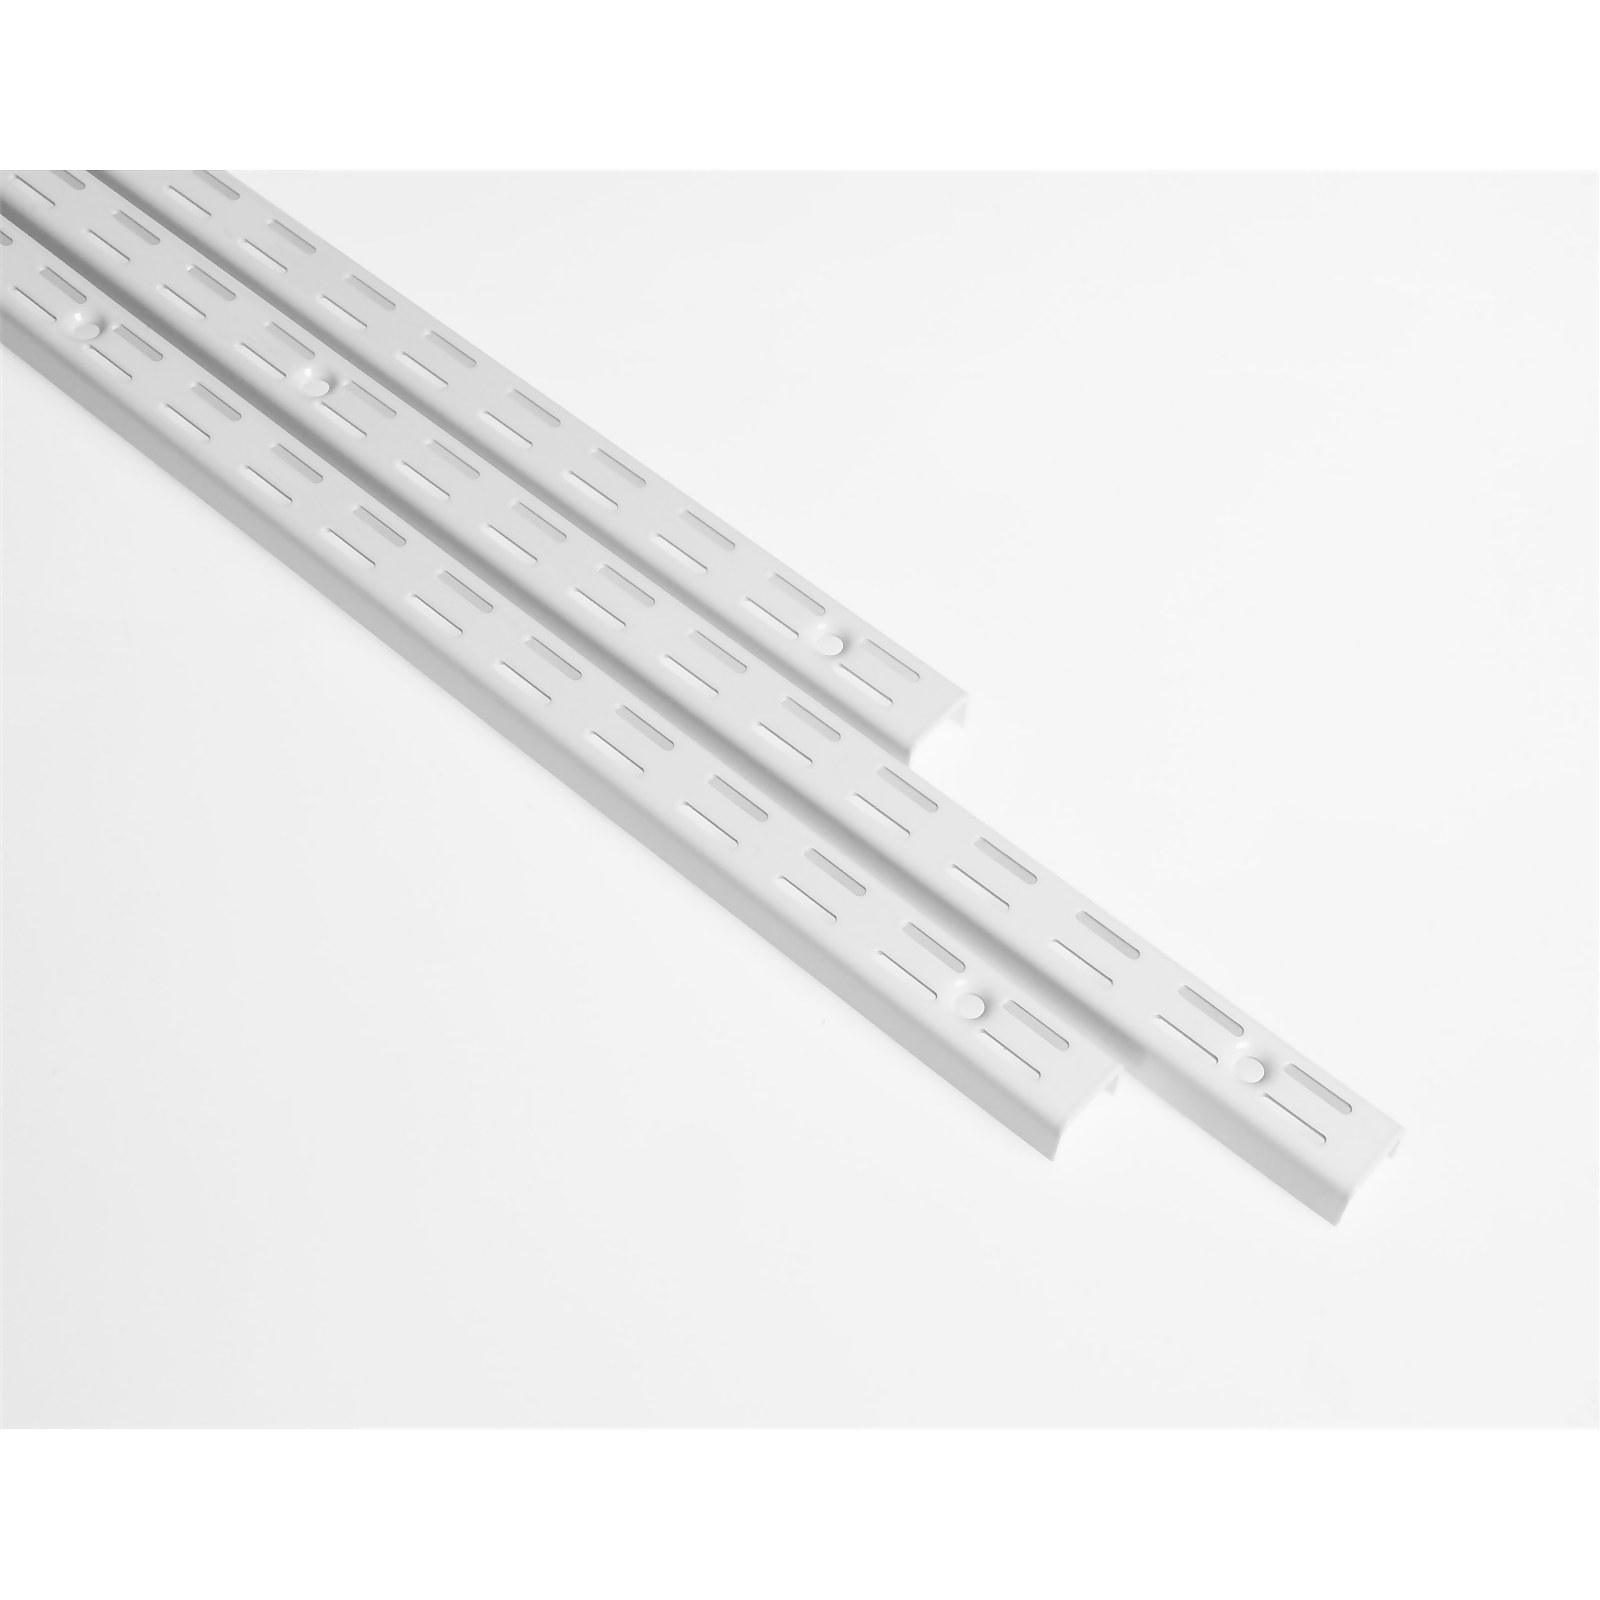 Photo of Anti-bacterial Twin Slot Shelving Kit - 1219mm White Twinslot And 270mm Brackets - White